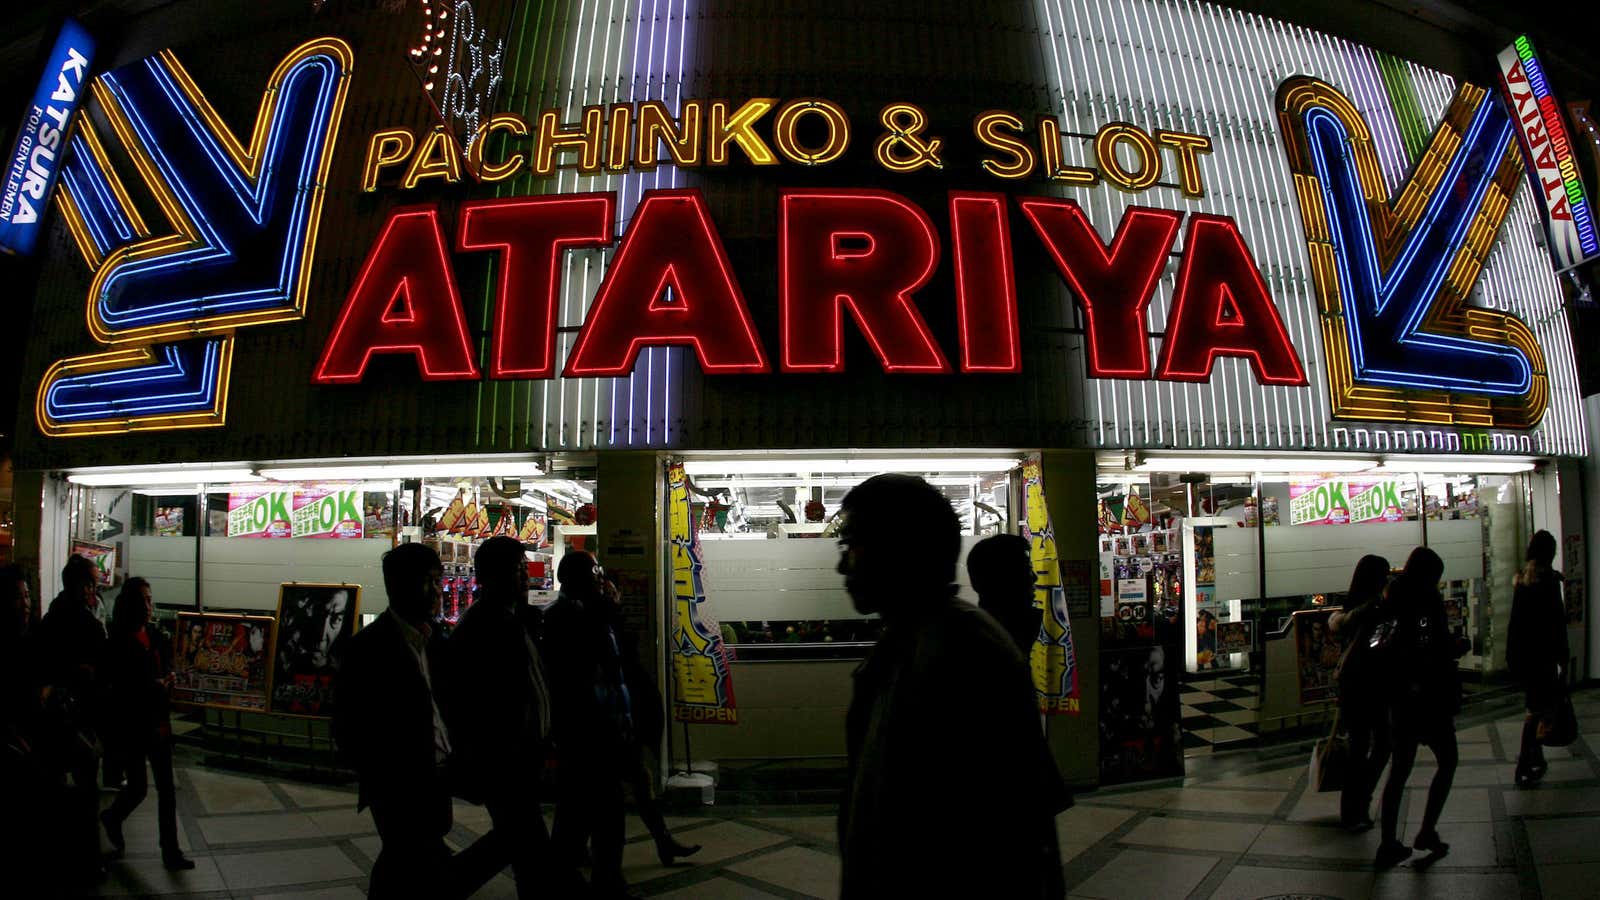 Expect ritzier pachinko spots after casinos are legalized.